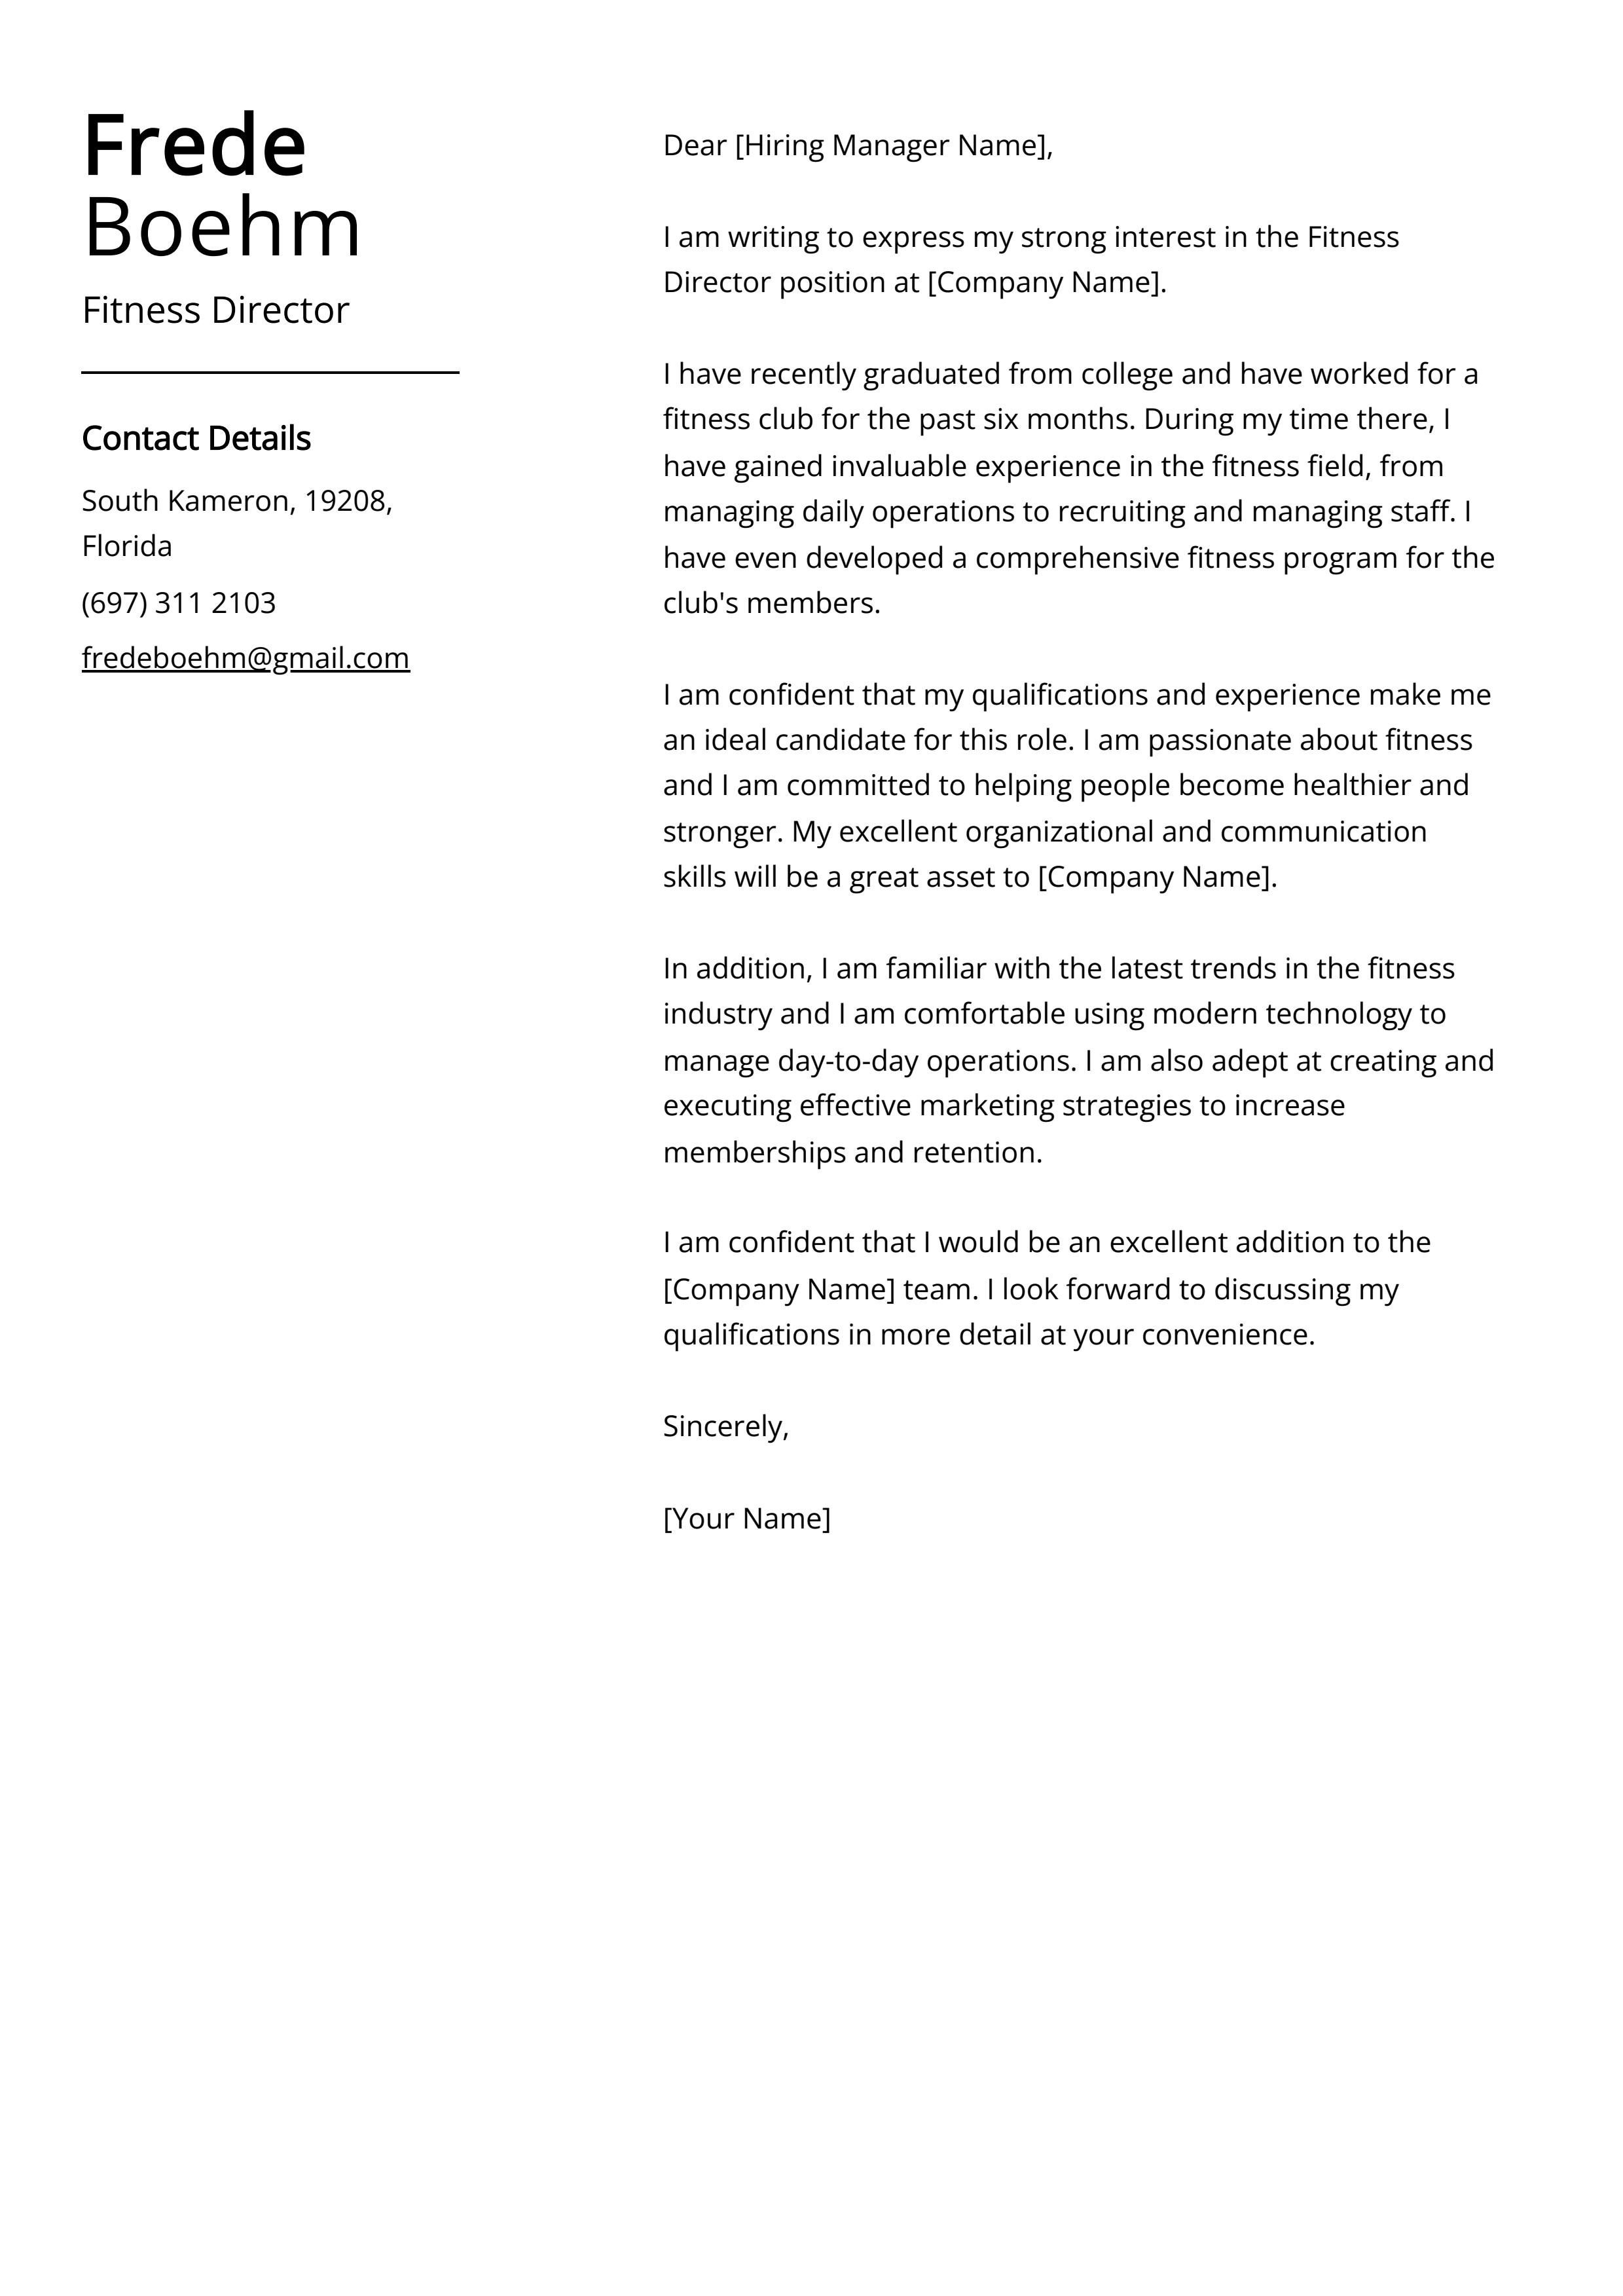 Fitness Director Cover Letter Example